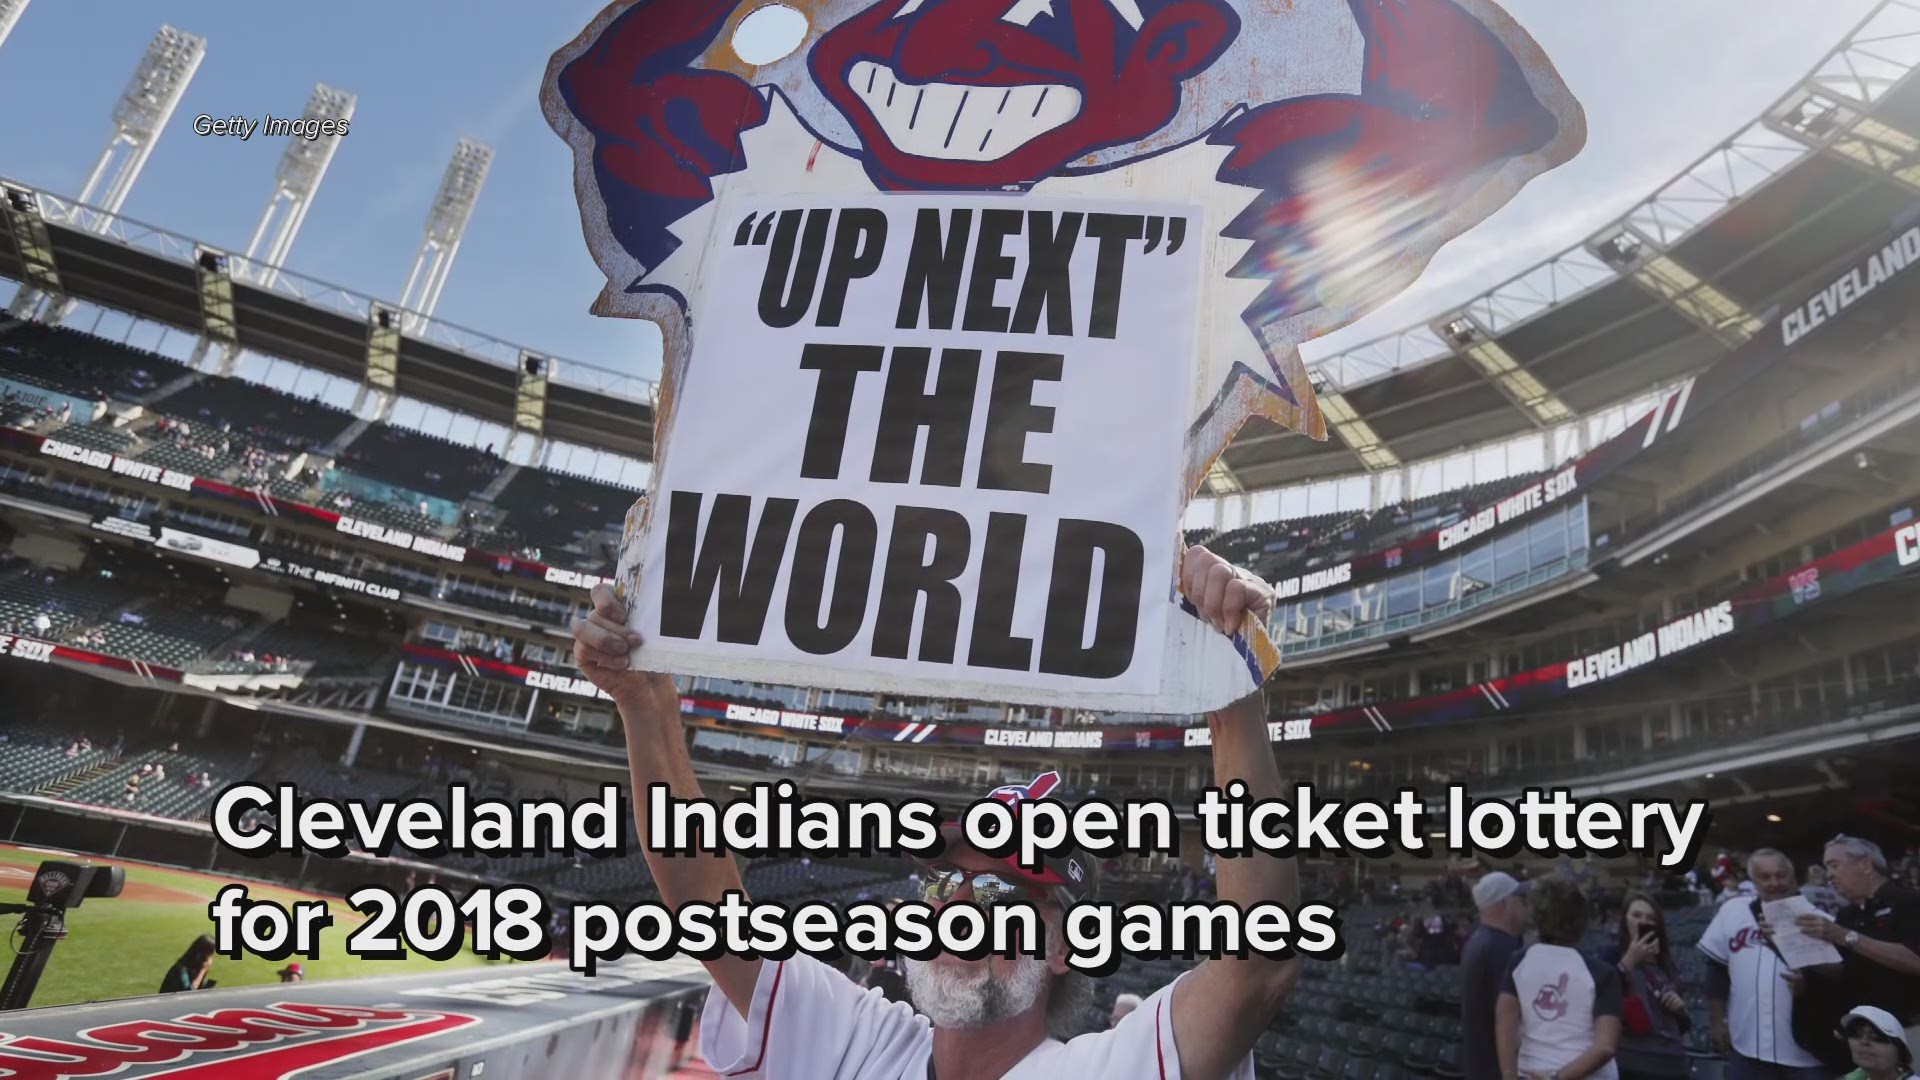 Cleveland Indians open ticket lottery for 2018 postseason games